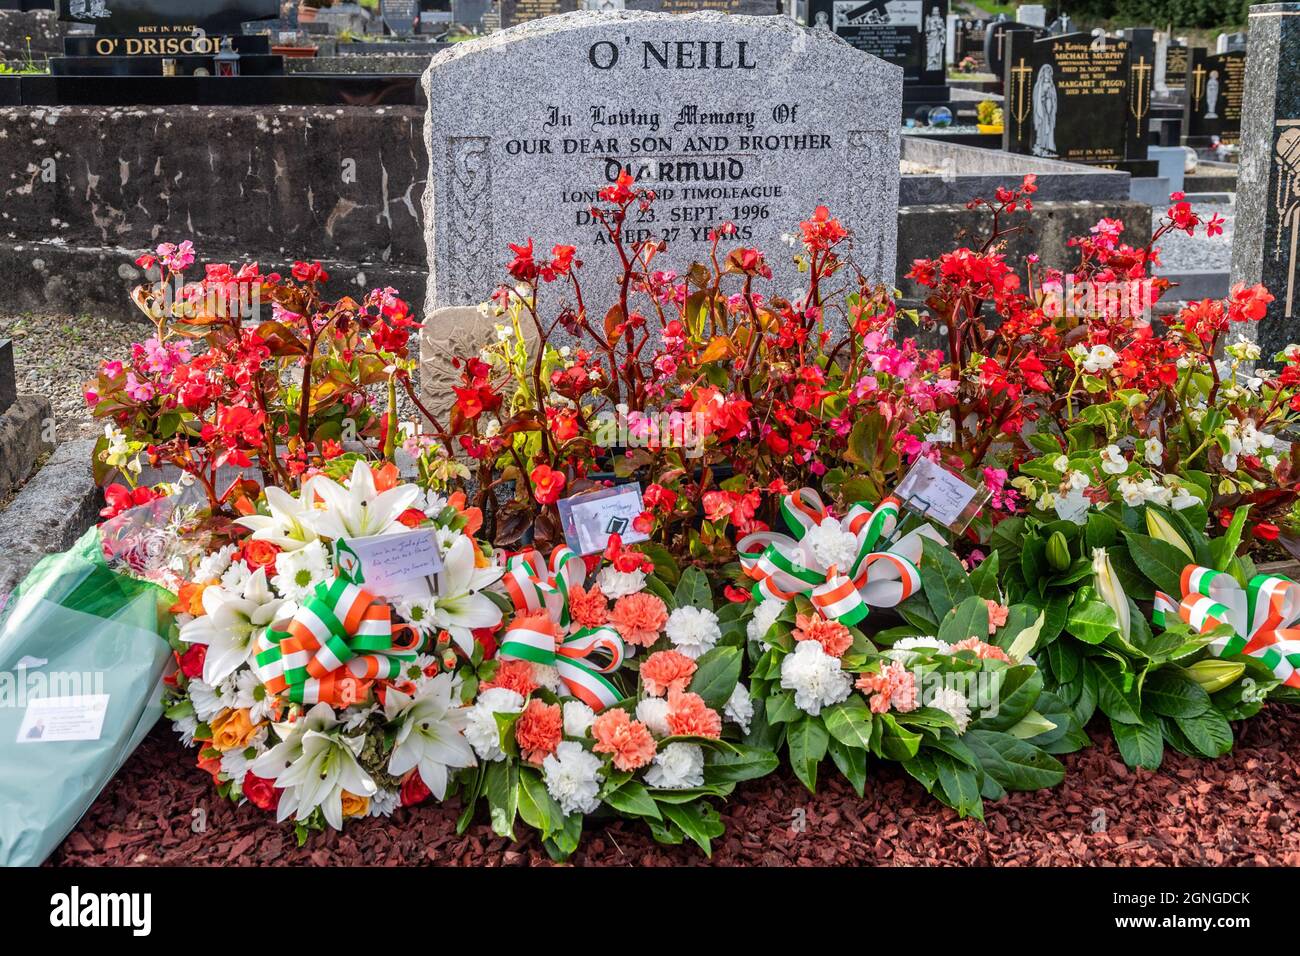 Timoleague, West Cork, Ireland. 25th Sep, 2021. The grave of IRA member Diarmuid O'Neill, who was shot and killed by the Metropolitan Police on 23rd September, 1996, is covered with flowers and wreaths on the eve of the official 25th anniversary of O'Neill's death. Former Republican prisoner, hunger striker and Sinn Féin TD, Martin Ferris, will be the guest speaker at tomorrow's event. Credit: AG News/Alamy Live News Stock Photo